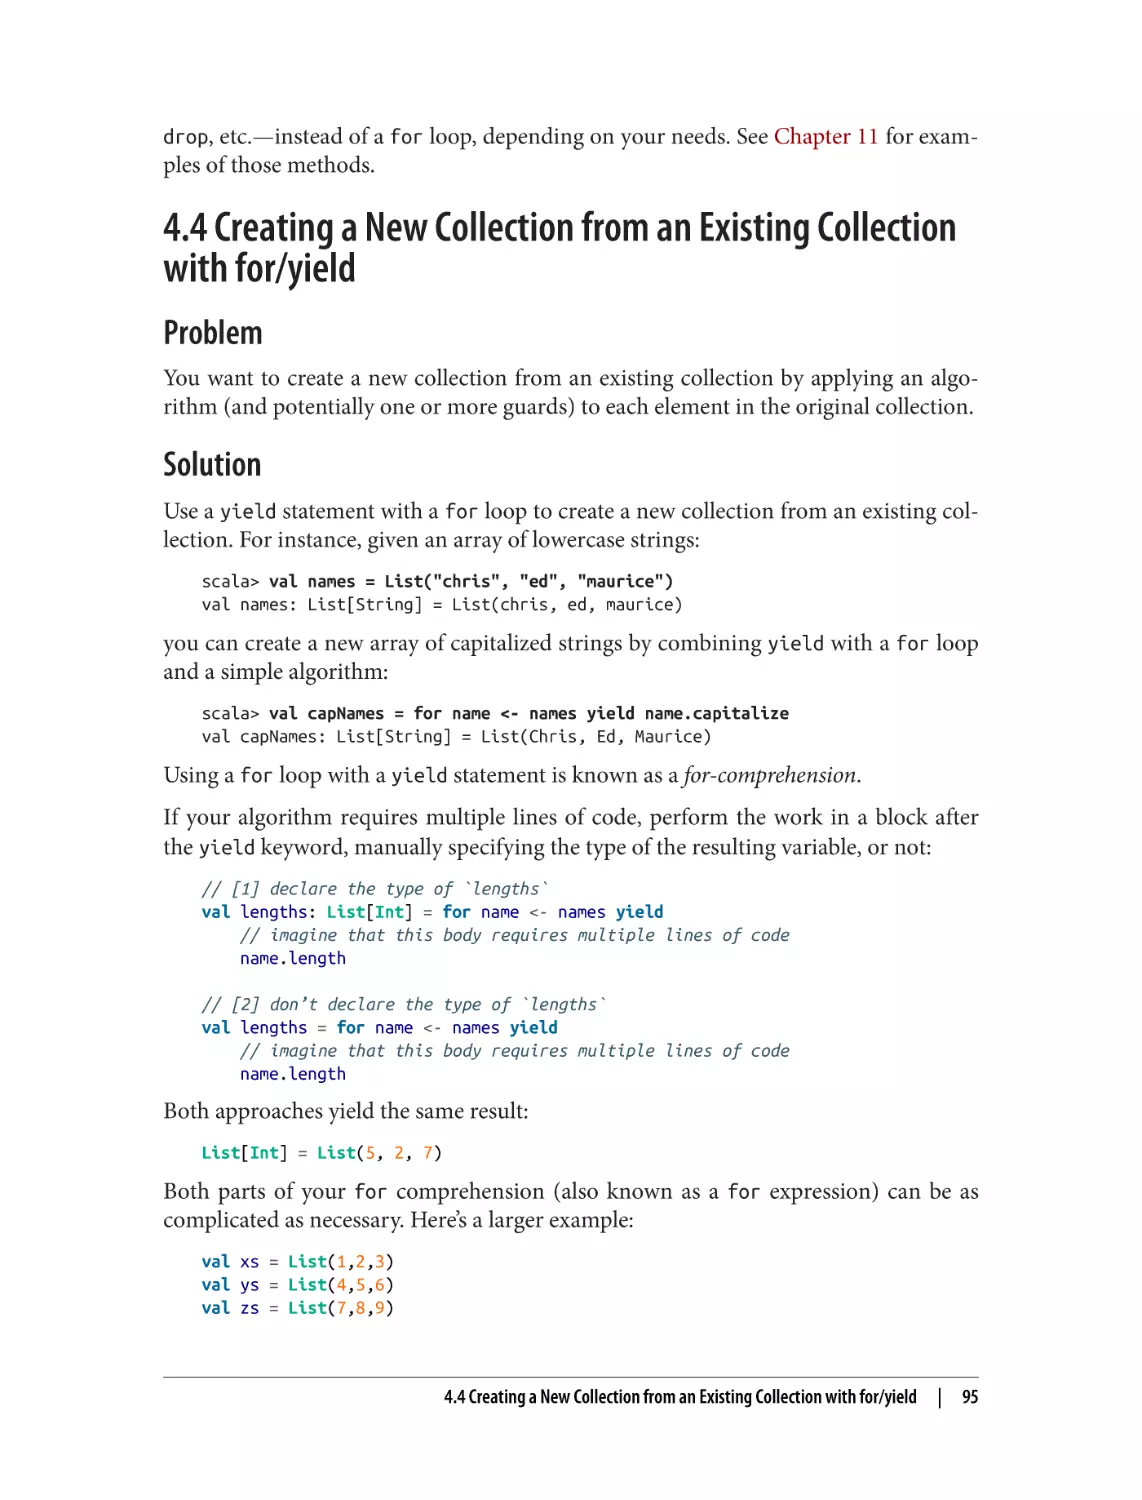 4.4 Creating a New Collection from an Existing Collection with for/yield
Problem
Solution